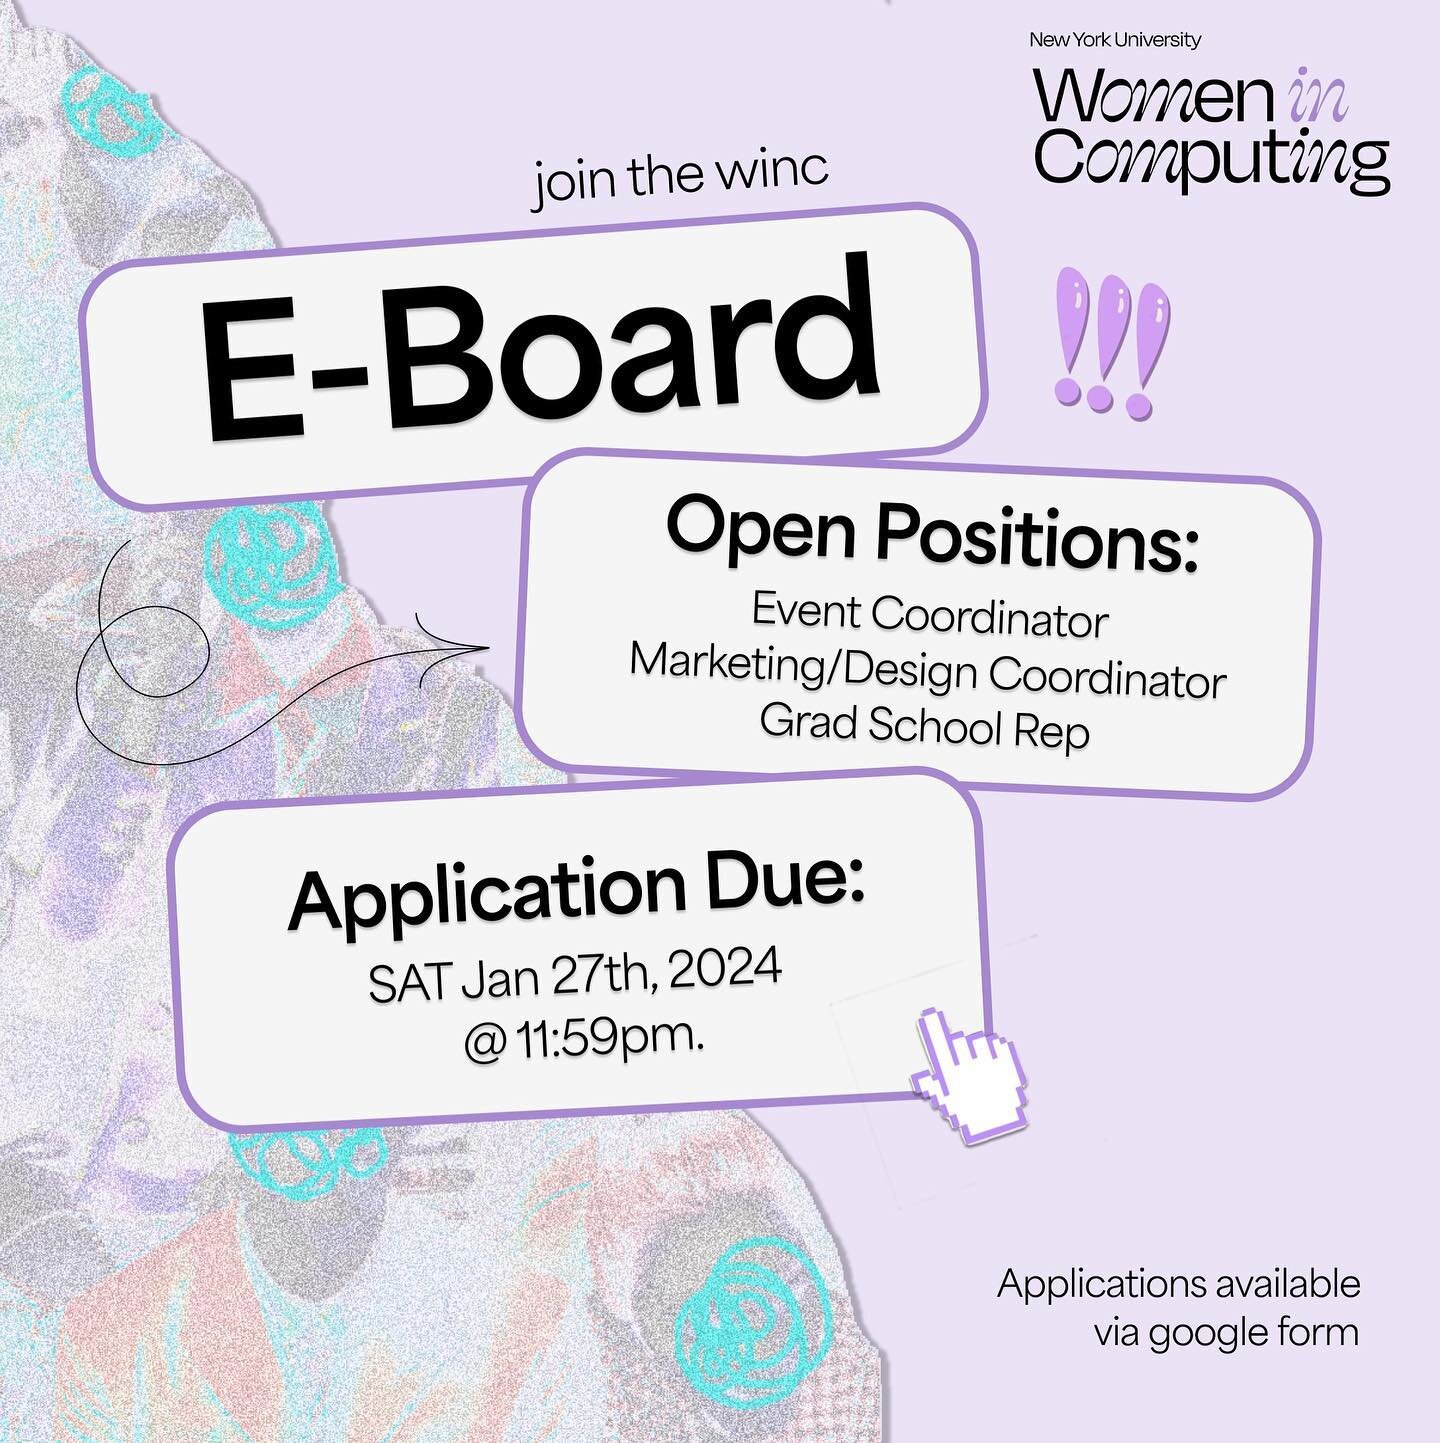 Happy Spring Semester 💐 The WinC E-board is excited to share that we are looking for new members to join us! 

Using the link in our bio, please use the google form to see what position(s) you are interested in to apply. Apps are due Jan 27th. We wi